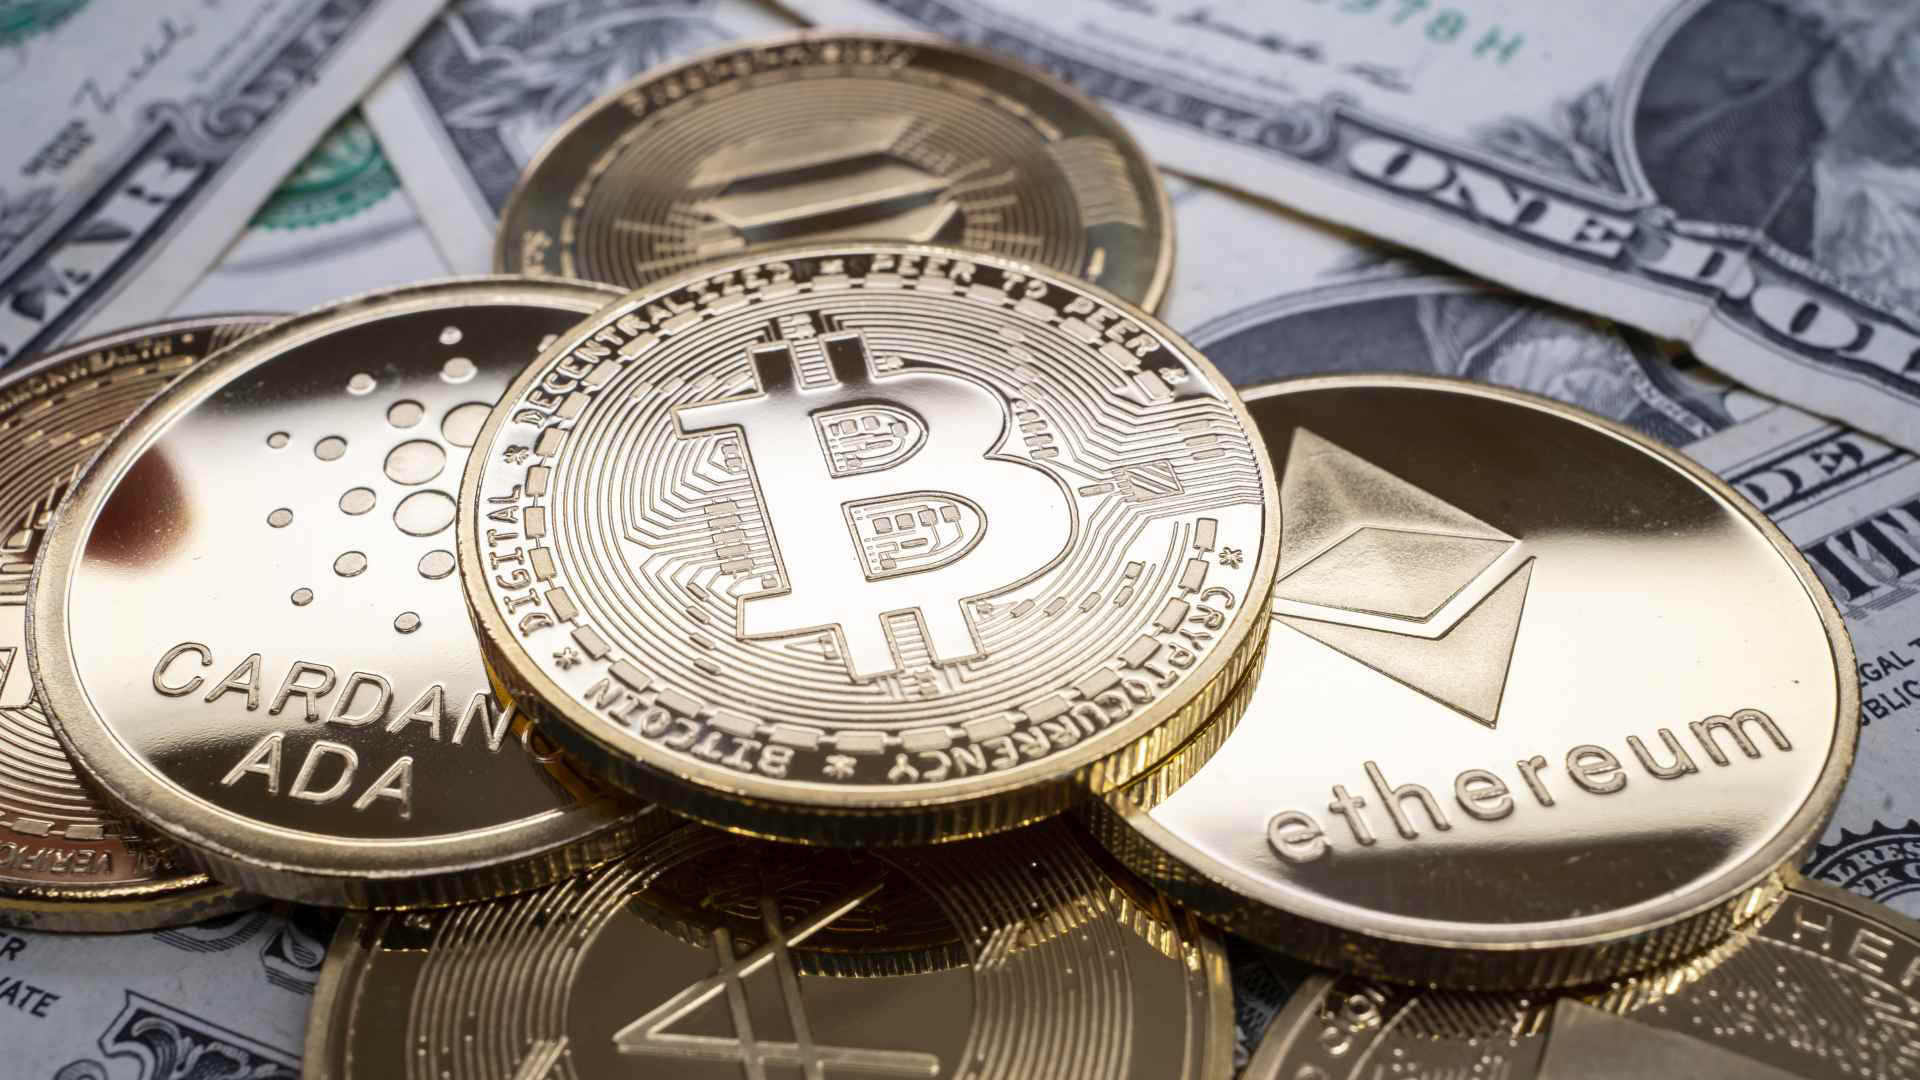 is bitcoin a safe investment